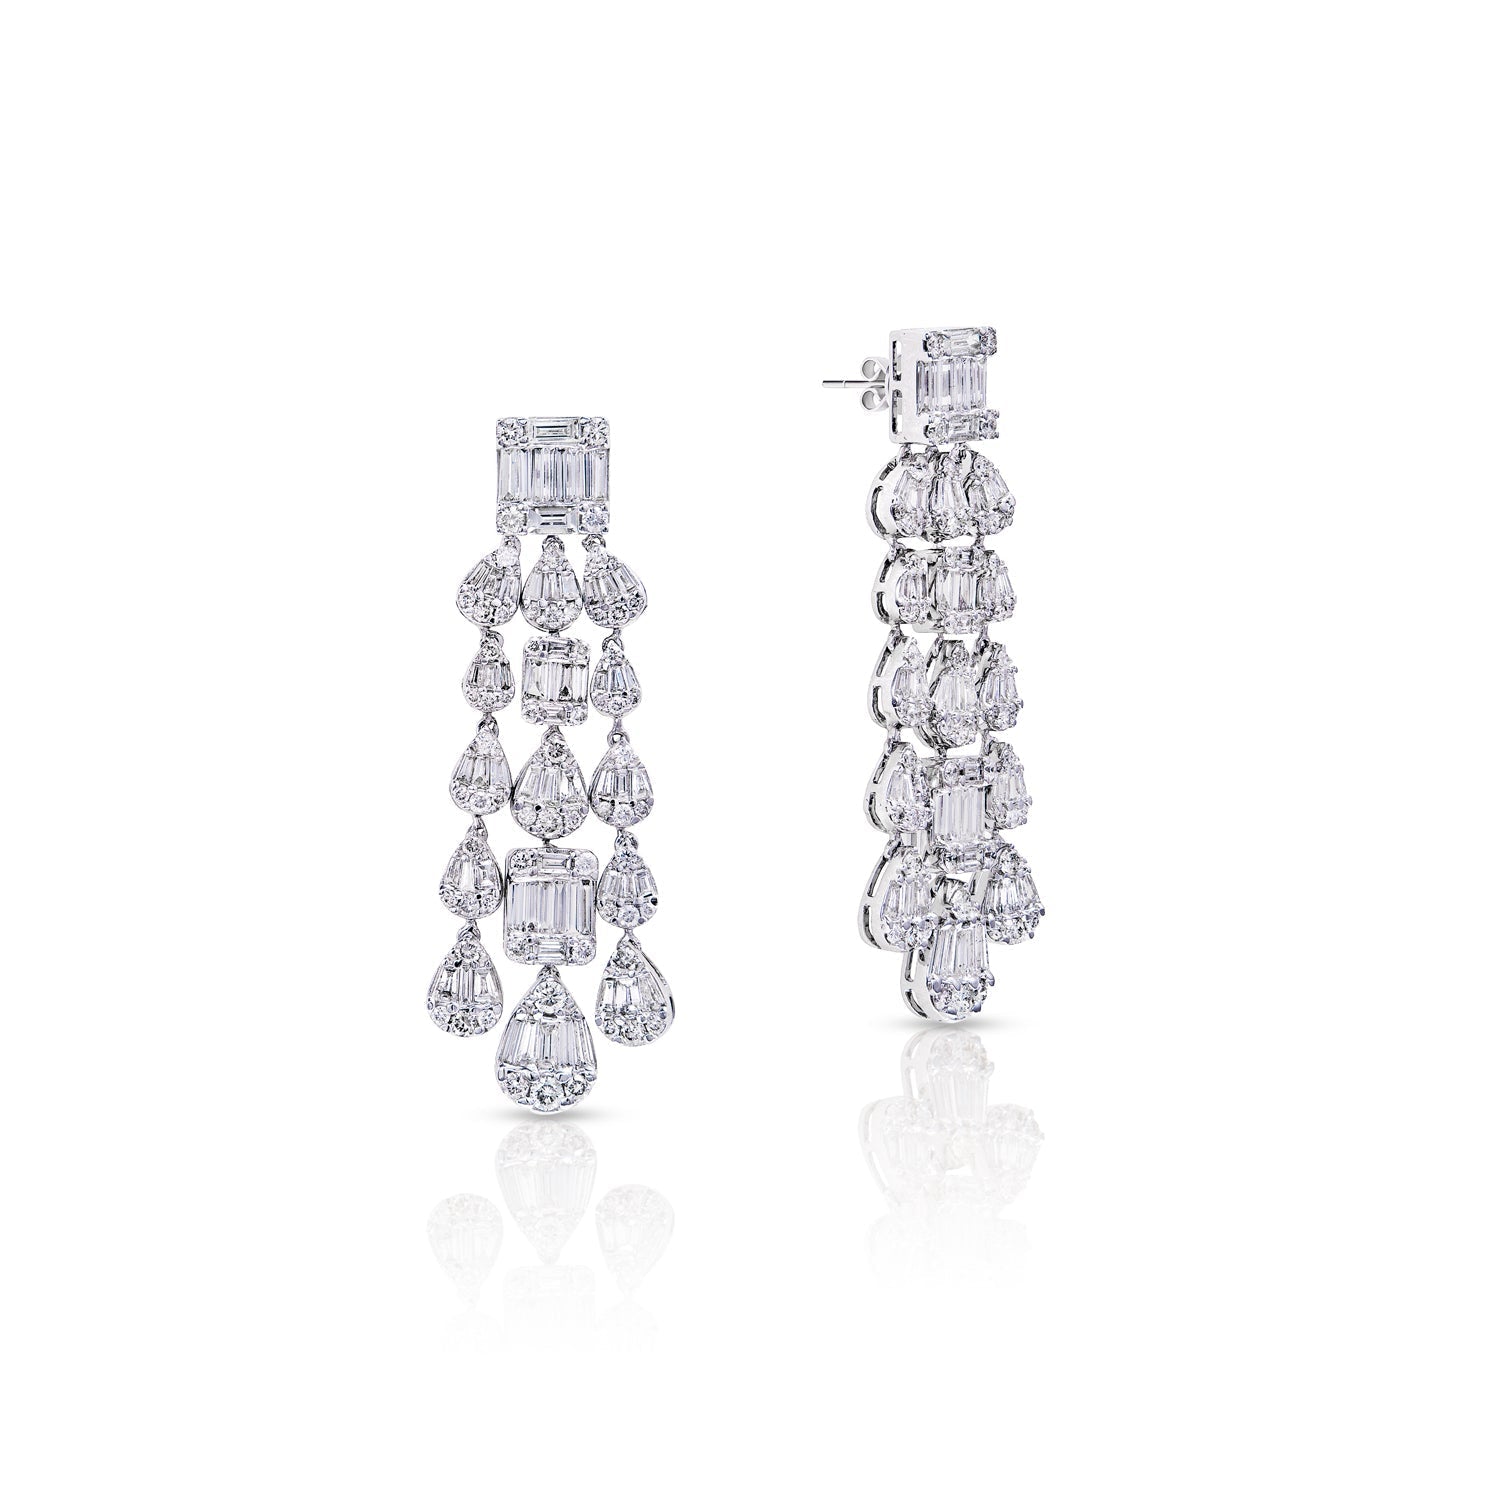 Kendra 6 Carat Combine Mix Shape Diamond Chandelier Earrings in 14k White Gold Front and Side View